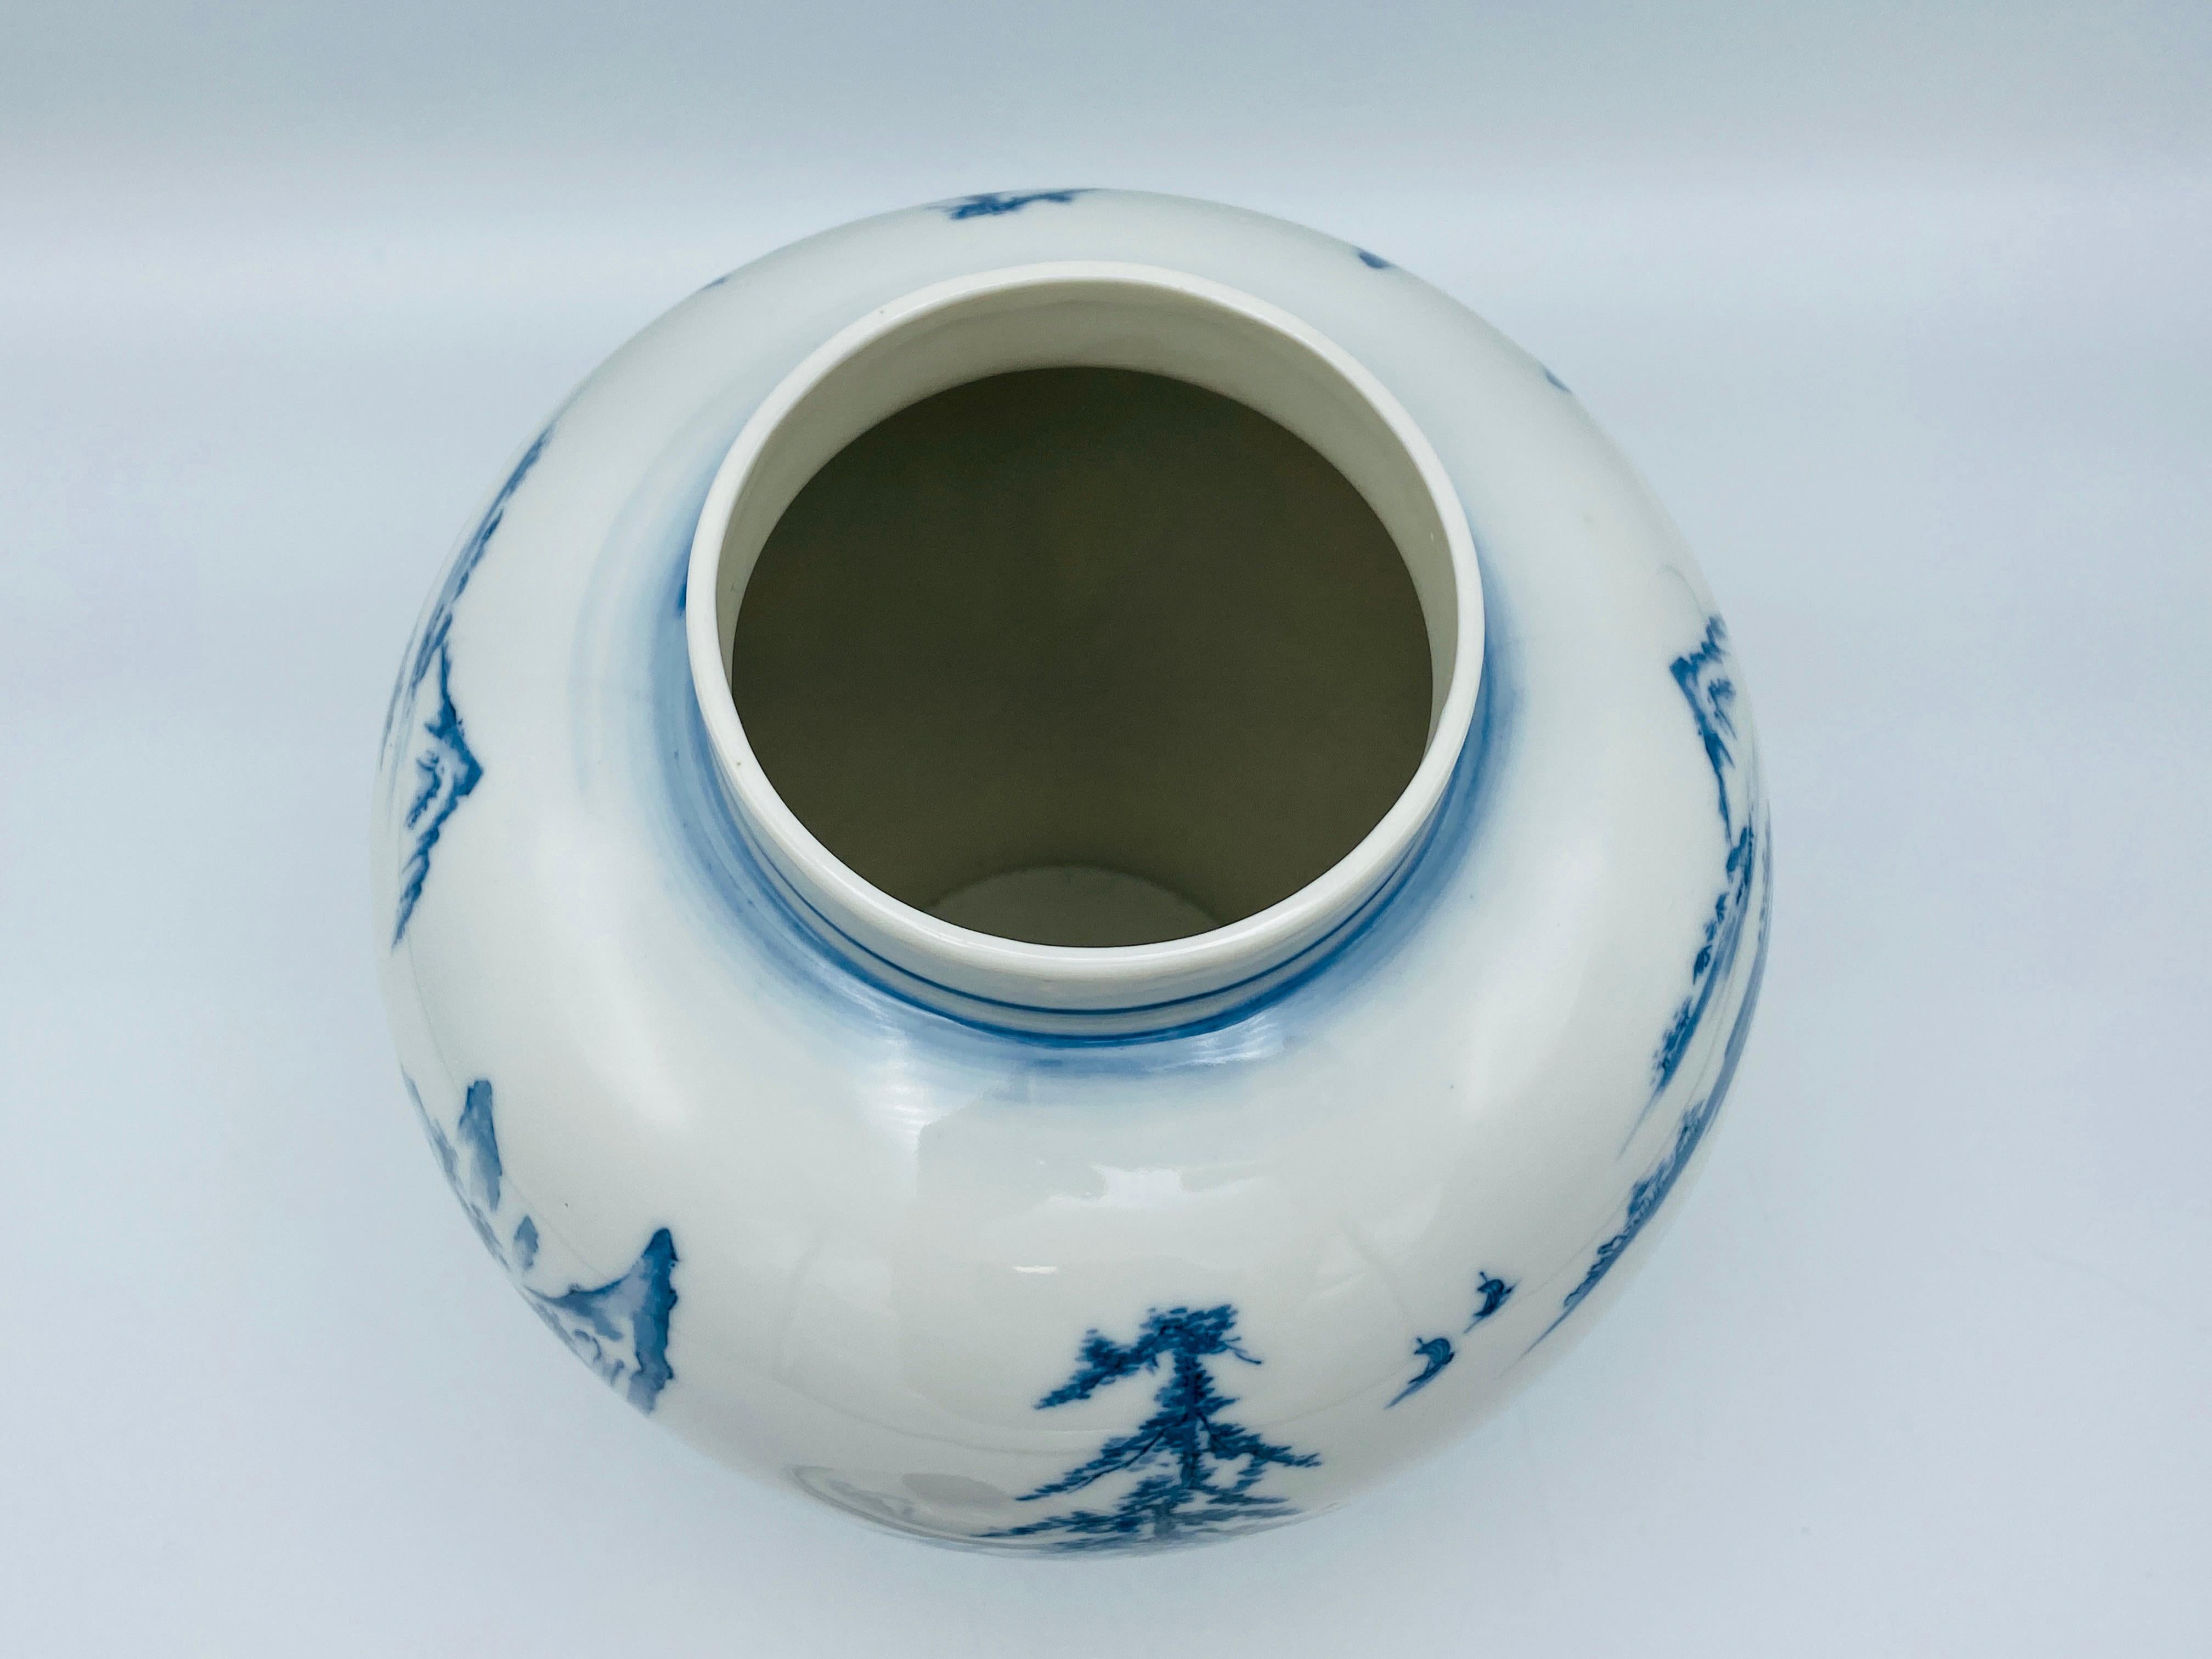 Blue and White Porcelain Chinoiserie Ginger Jar with Ornate Scene, 1970s For Sale 8